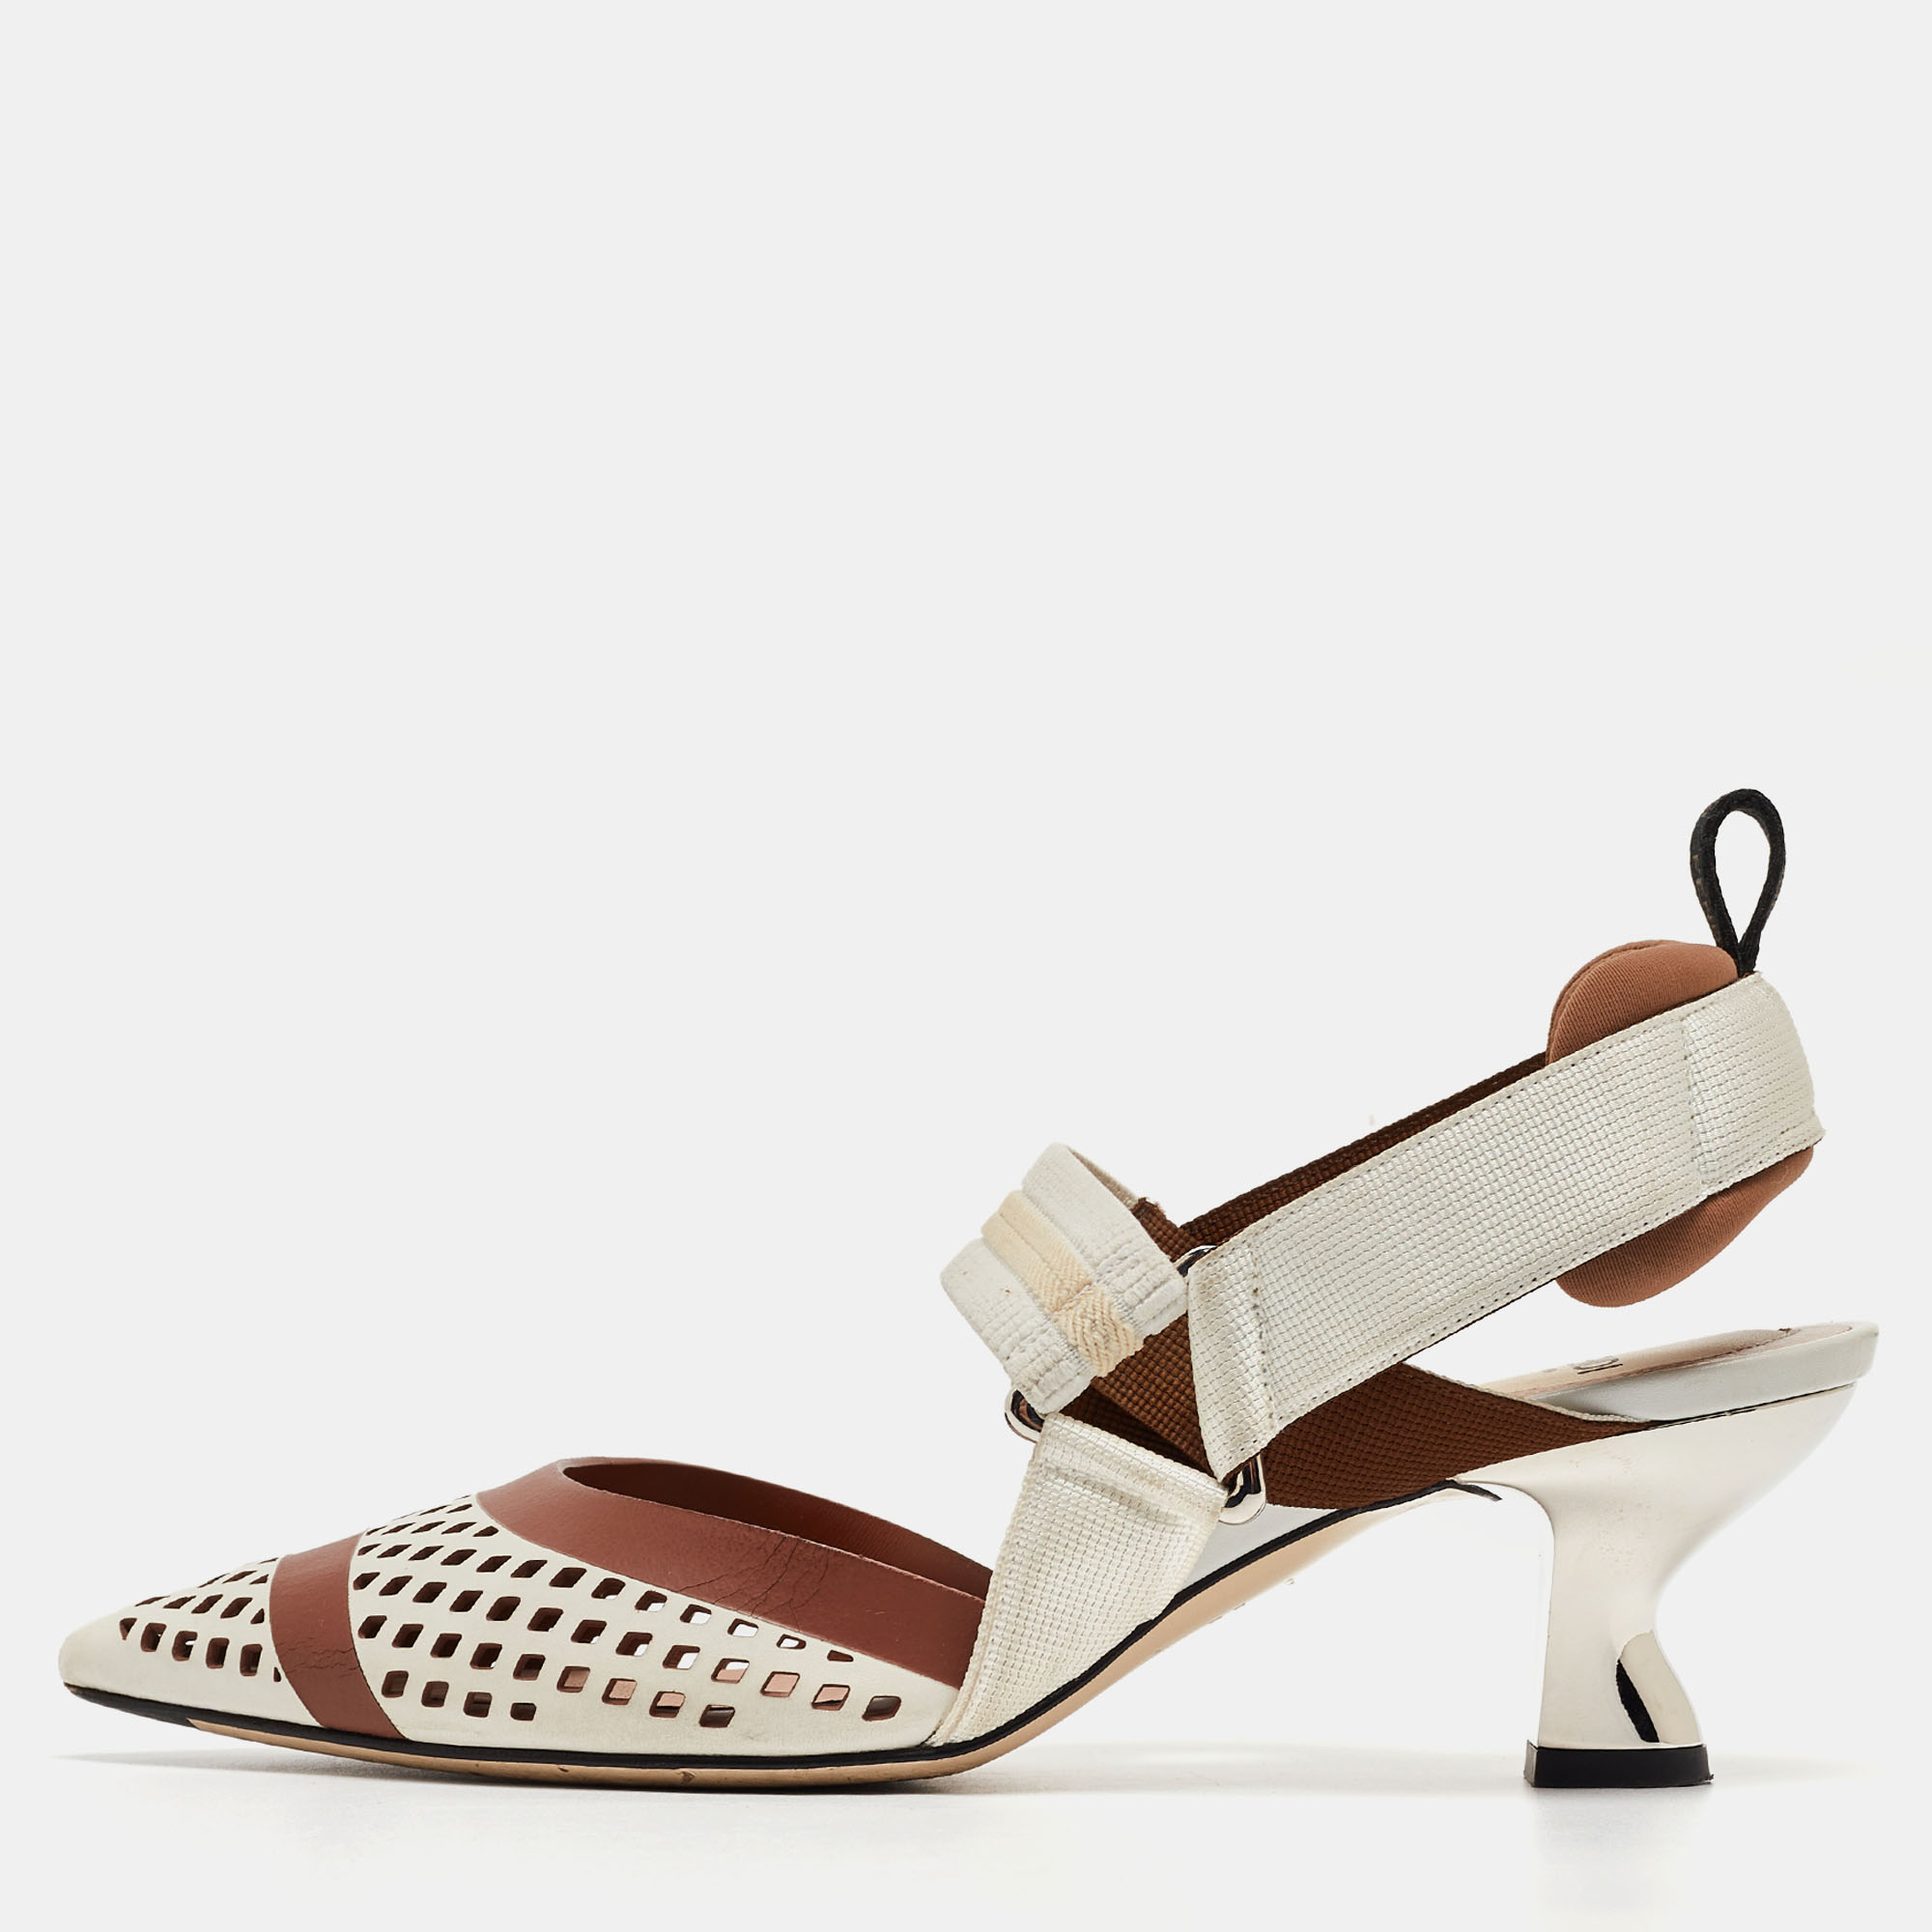 Fendi white/brown perforated leather and fabric colibri slingback pumps size 36